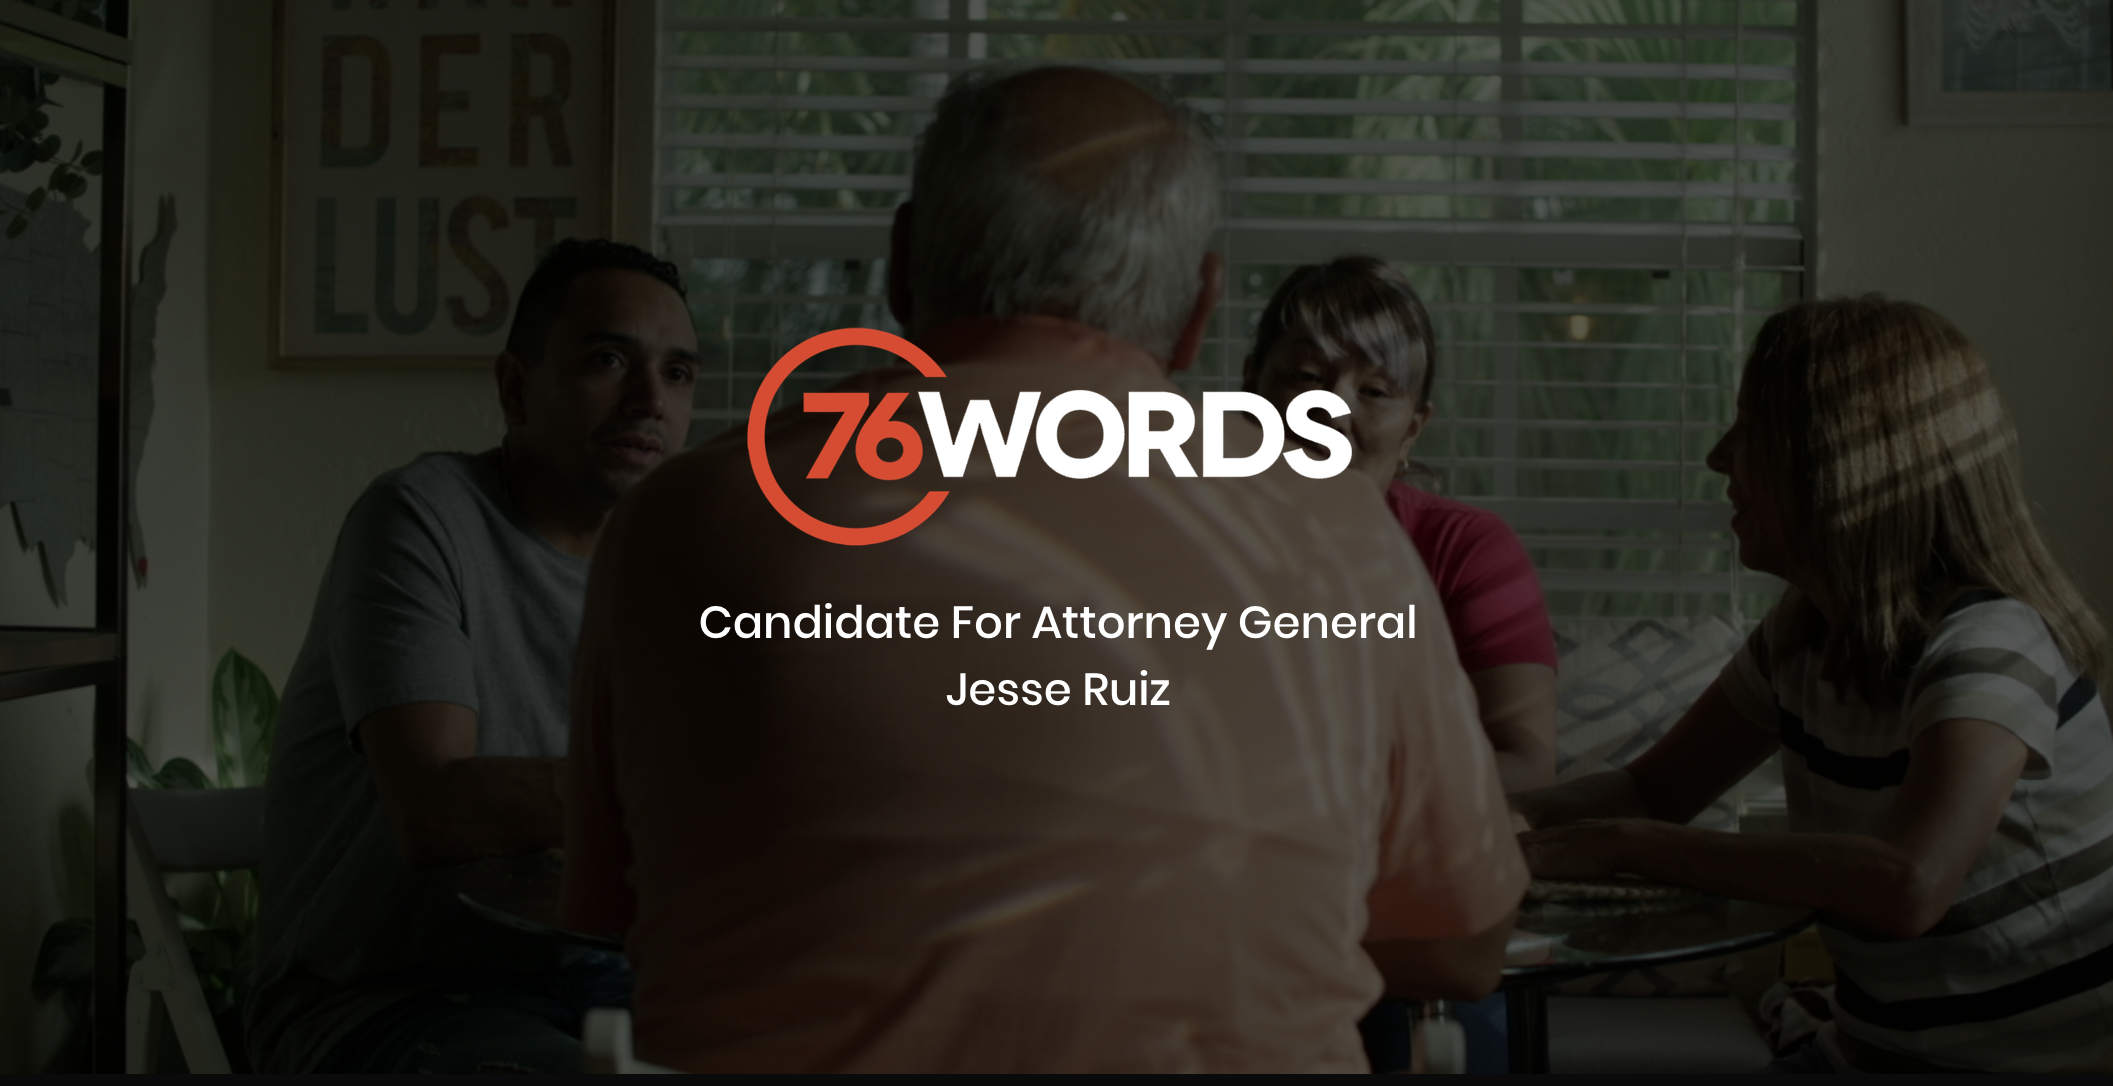 White and orange 76 Words Candidate For Attorney General Jesse Ruiz logo with dimmed background showing a group of two men and two women sitting around a table in a small room talking